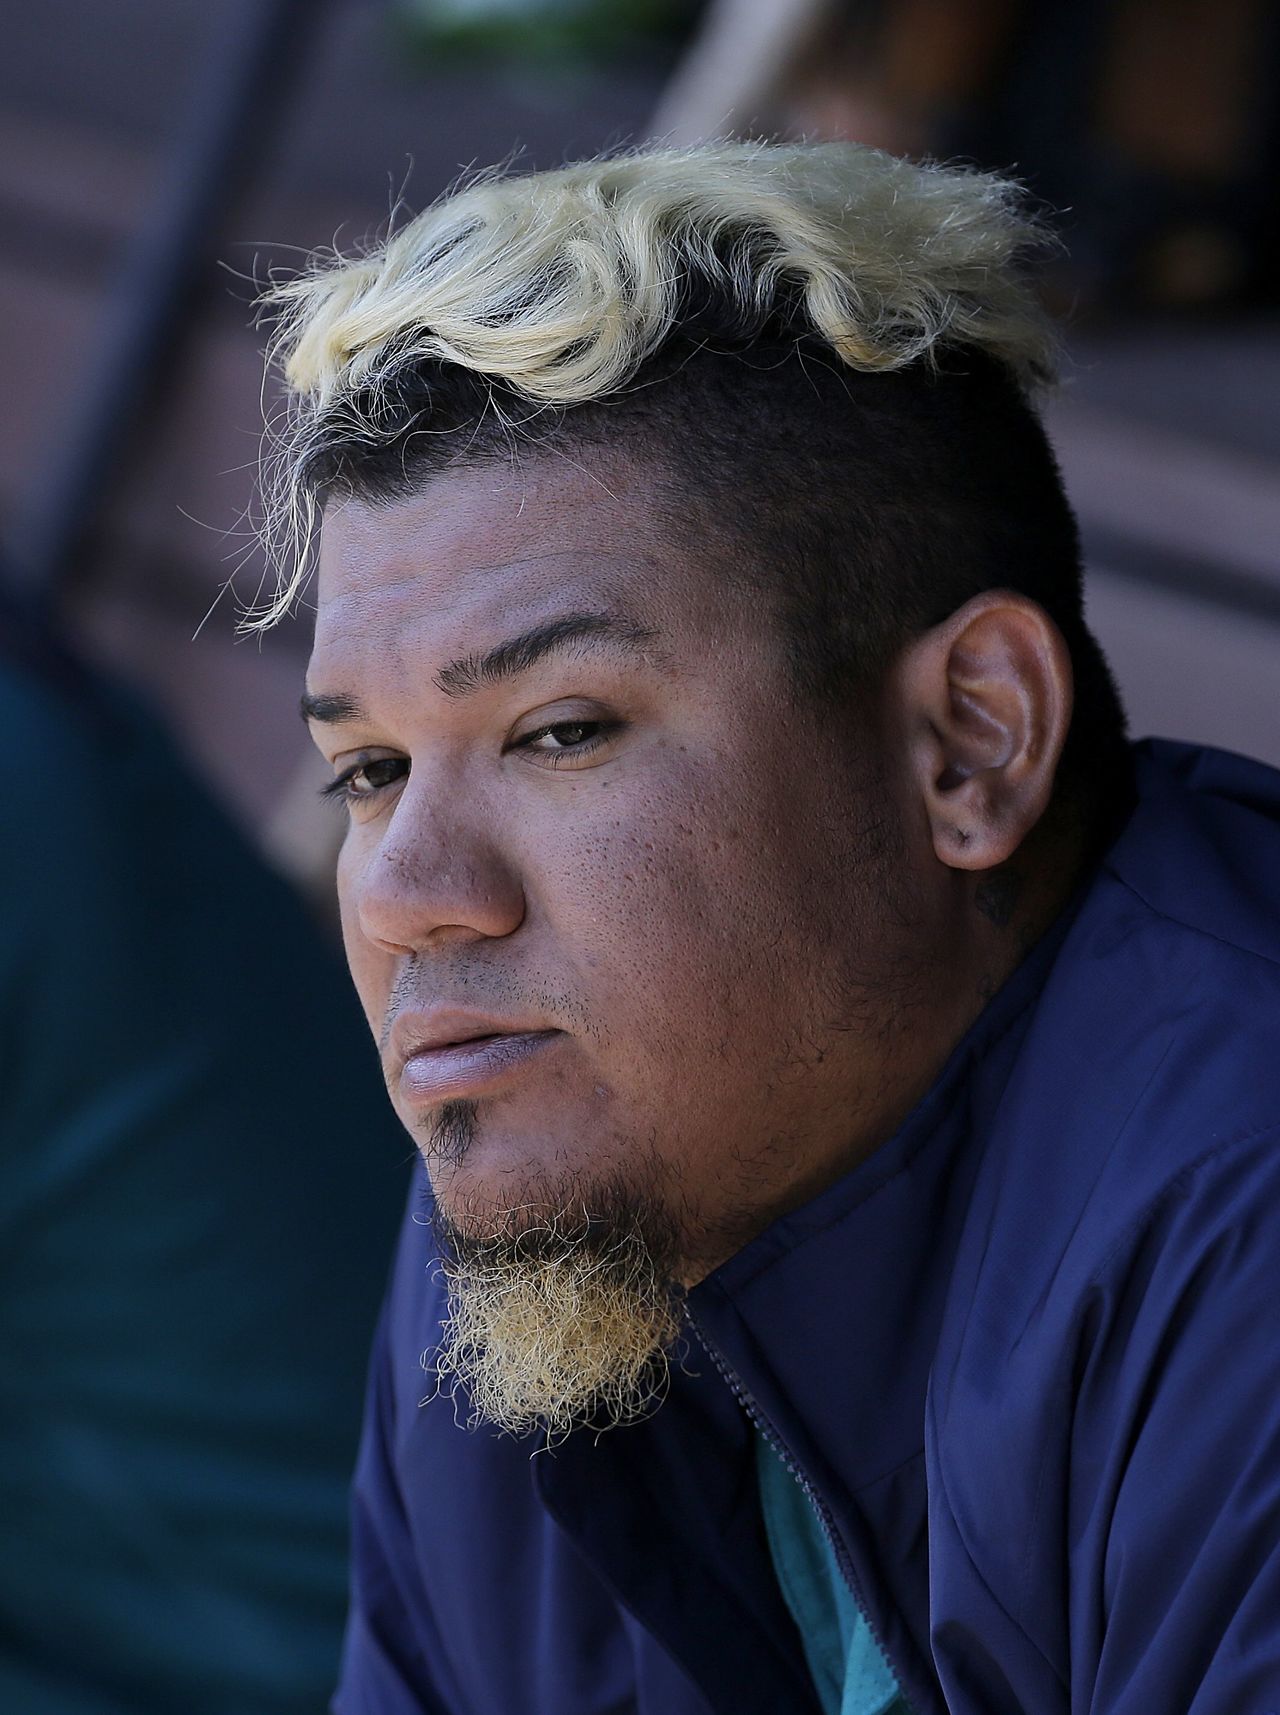 Will Felix Hernandez be able to make the Mariners contenders this year? Perhaps the glorious goatee will help.